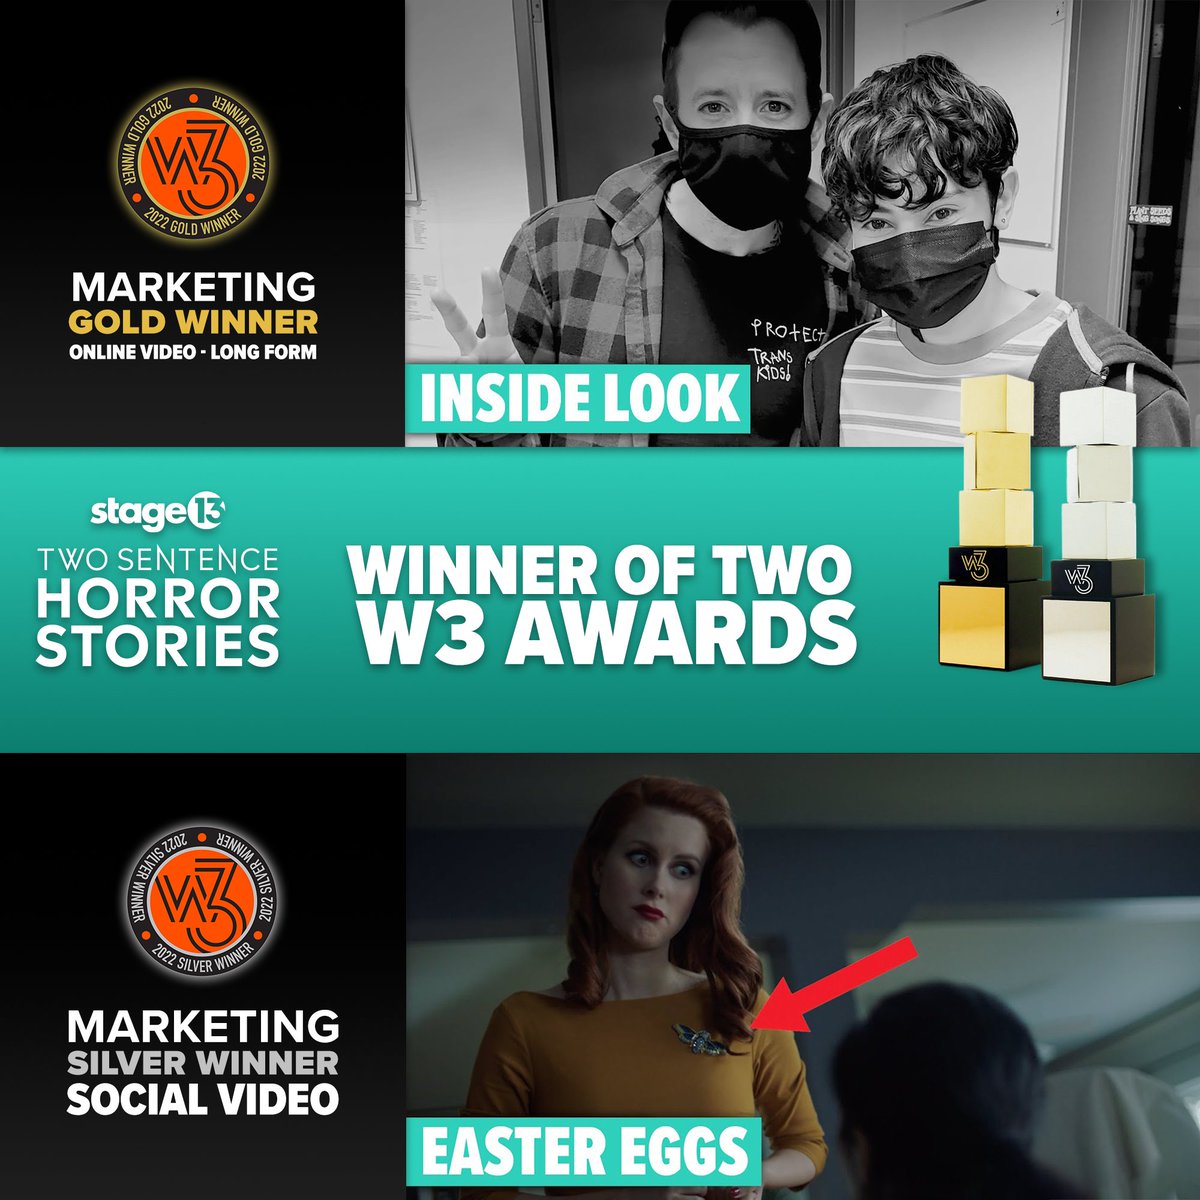 We're thrilled to have been honored with two @W3Awards for our work on #TwoSentenceHorrorStories! If you haven't already, be sure to follow the show on Instagram at instagram.com/twosentencehor… #w3award